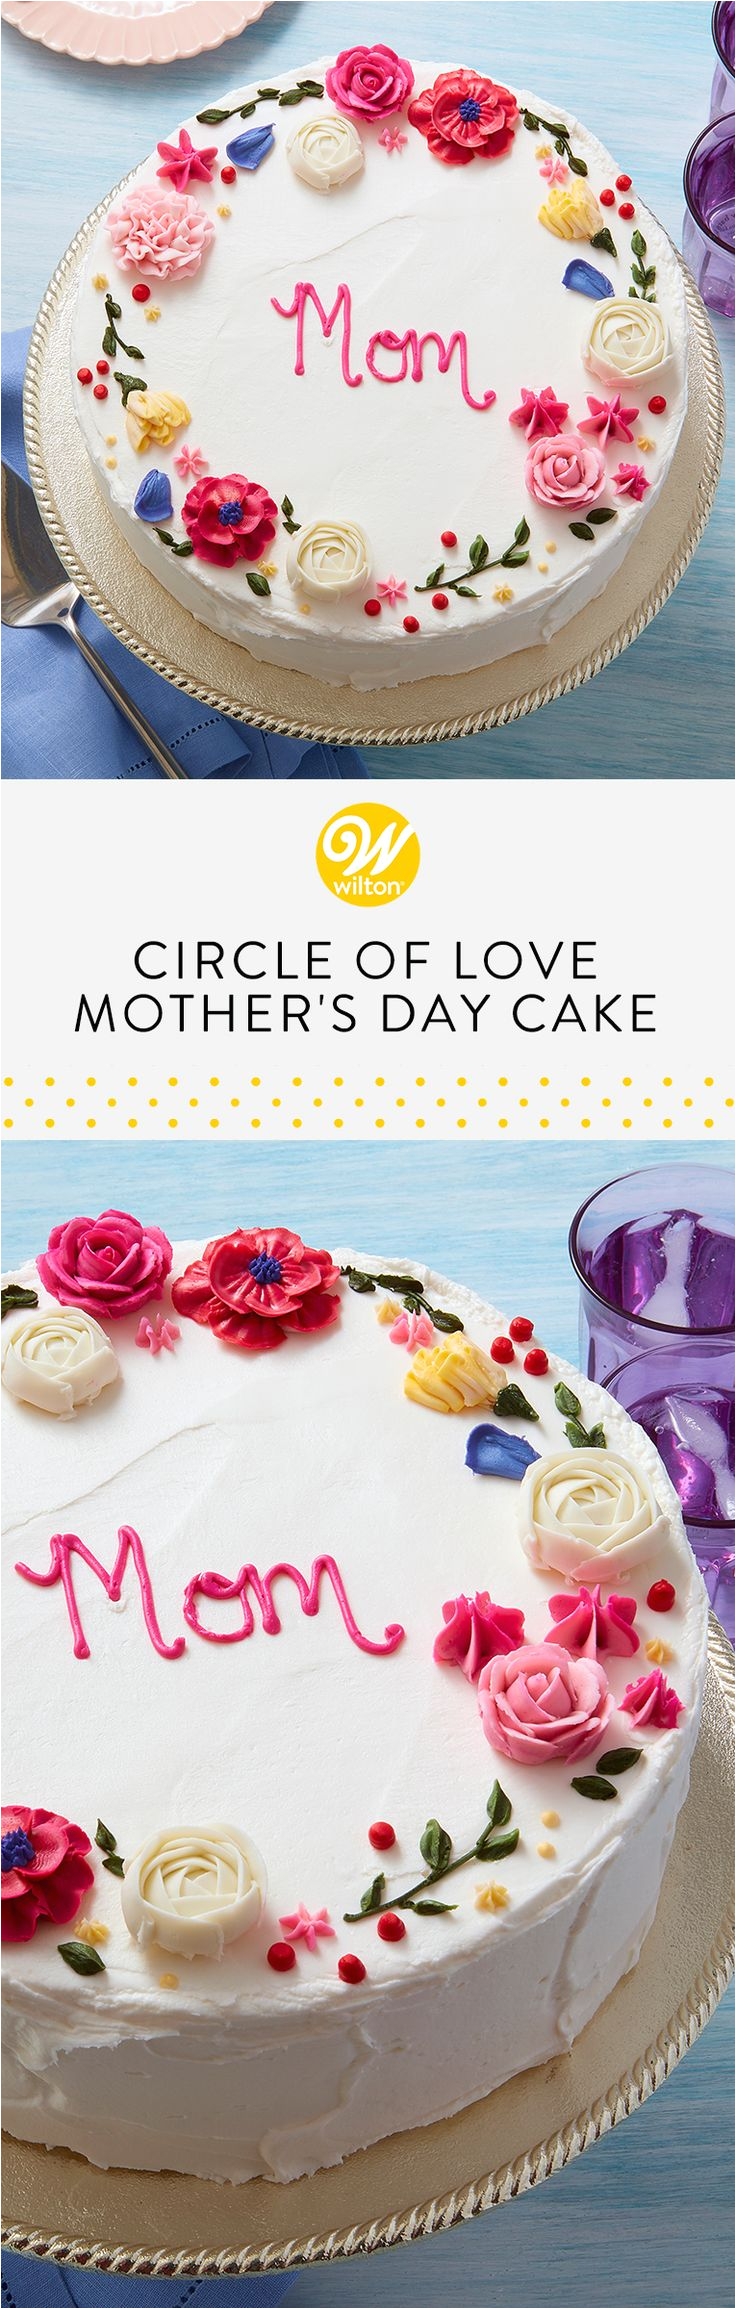 celebrate mom this mother s day with a beautiful cake decorated with her favorite buttercream flowers